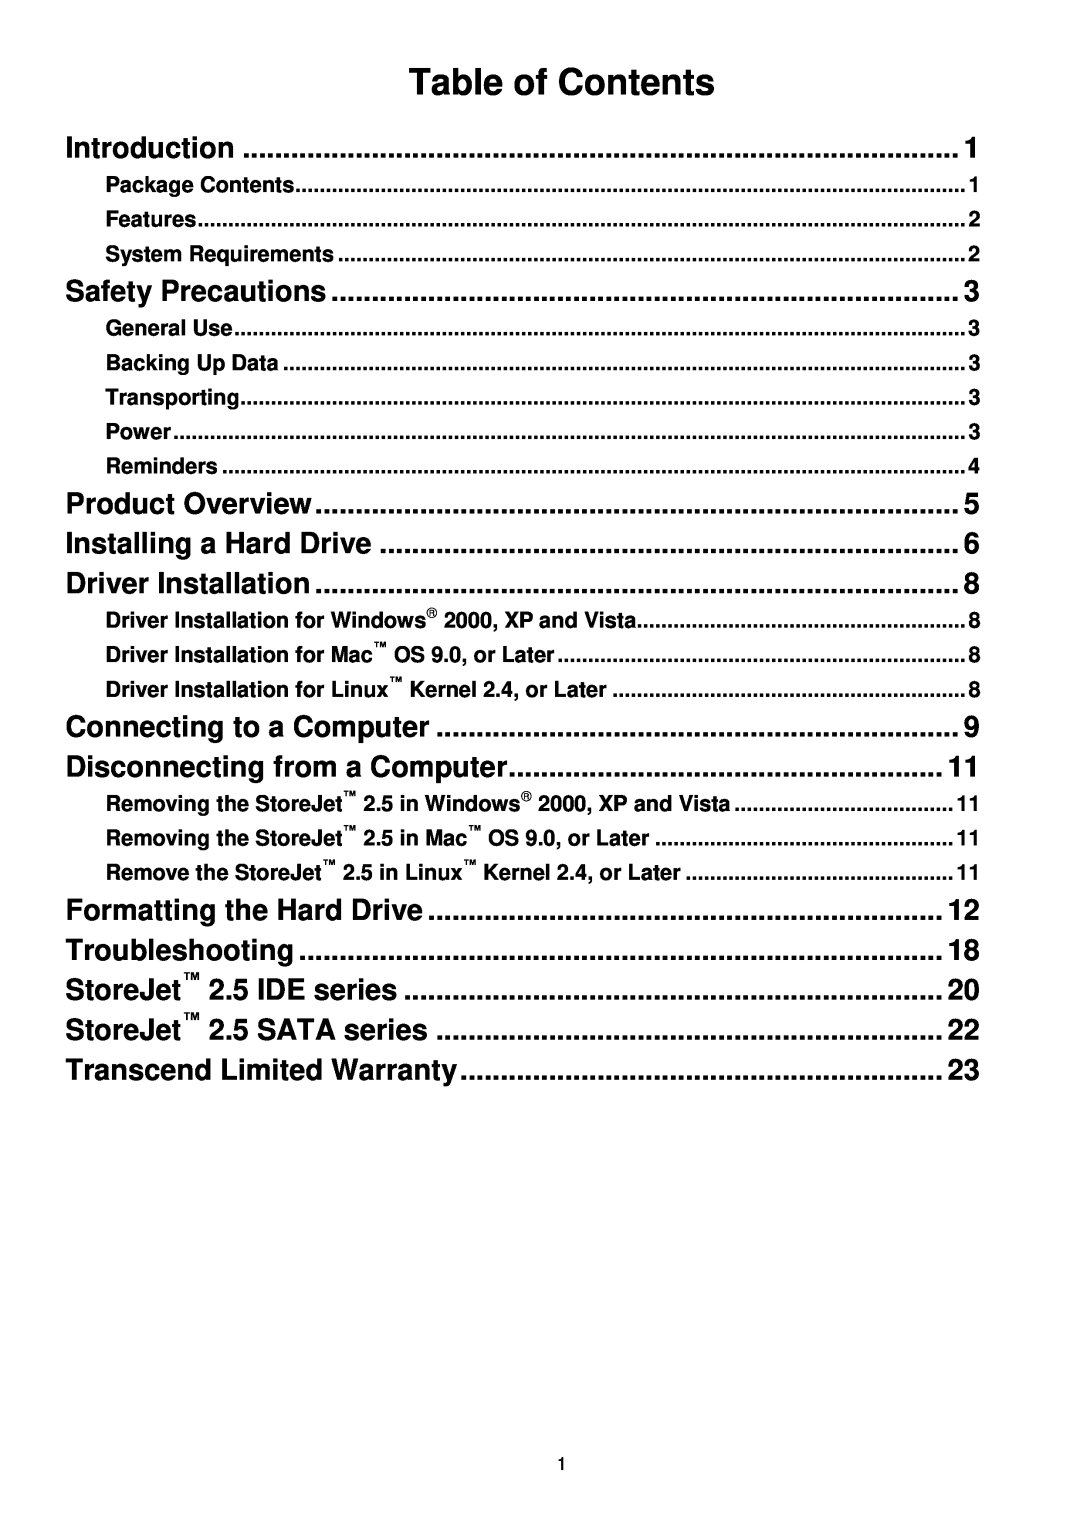 Transcend Information 25 Introduction, Safety Precautions, Product Overview, Driver Installation, Table of Contents 